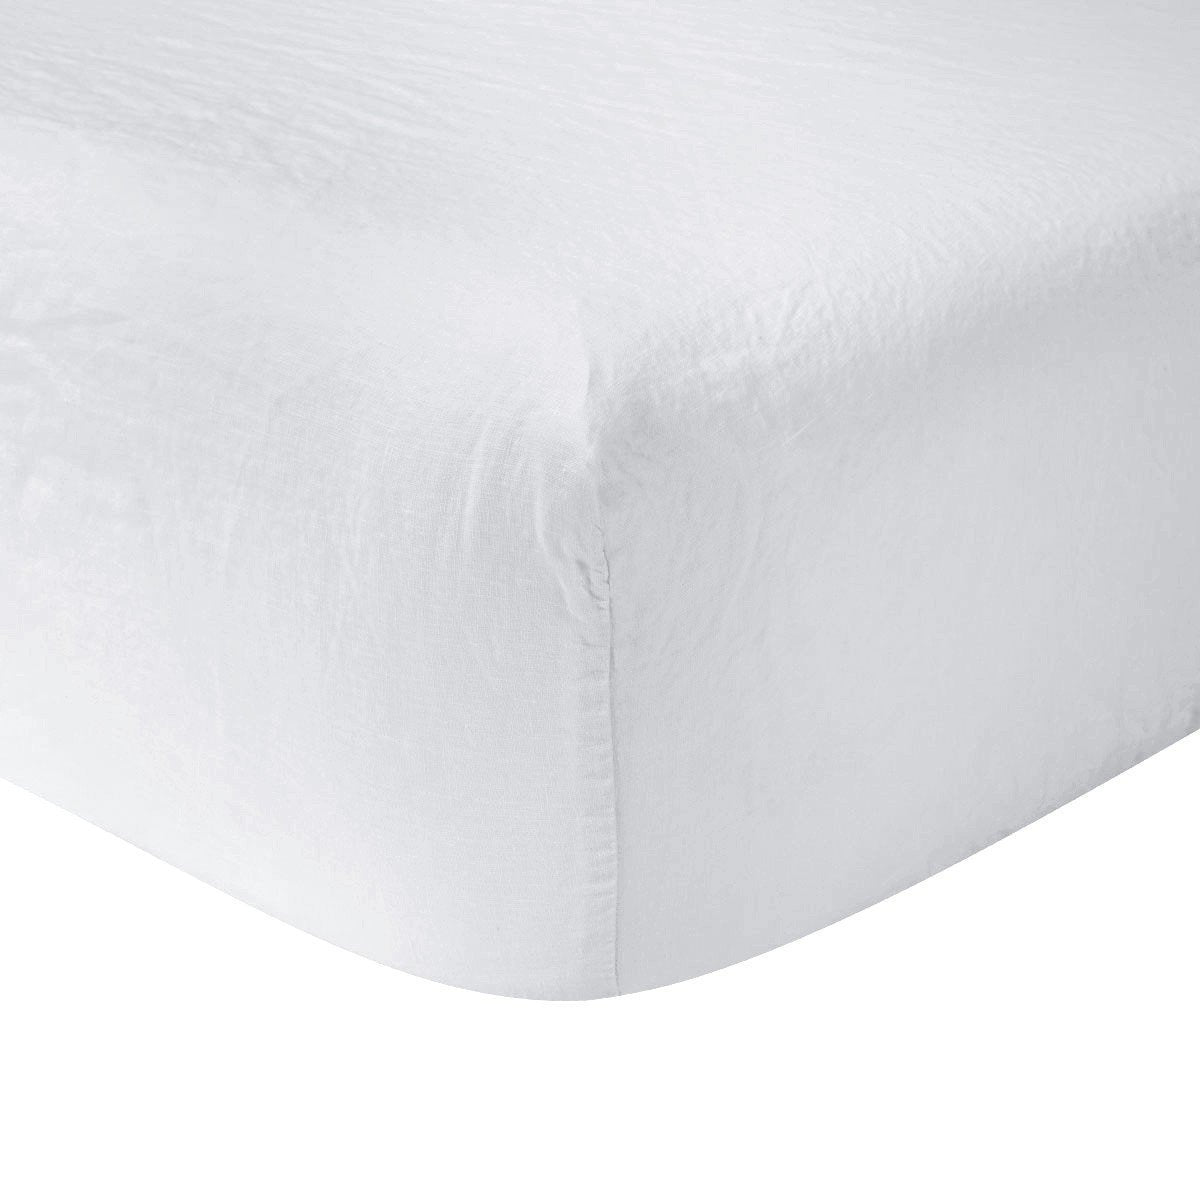 Fitted Sheet - Yves Delorme Originel Blanc White 100% Linen Bedding at Fig Linens and Home